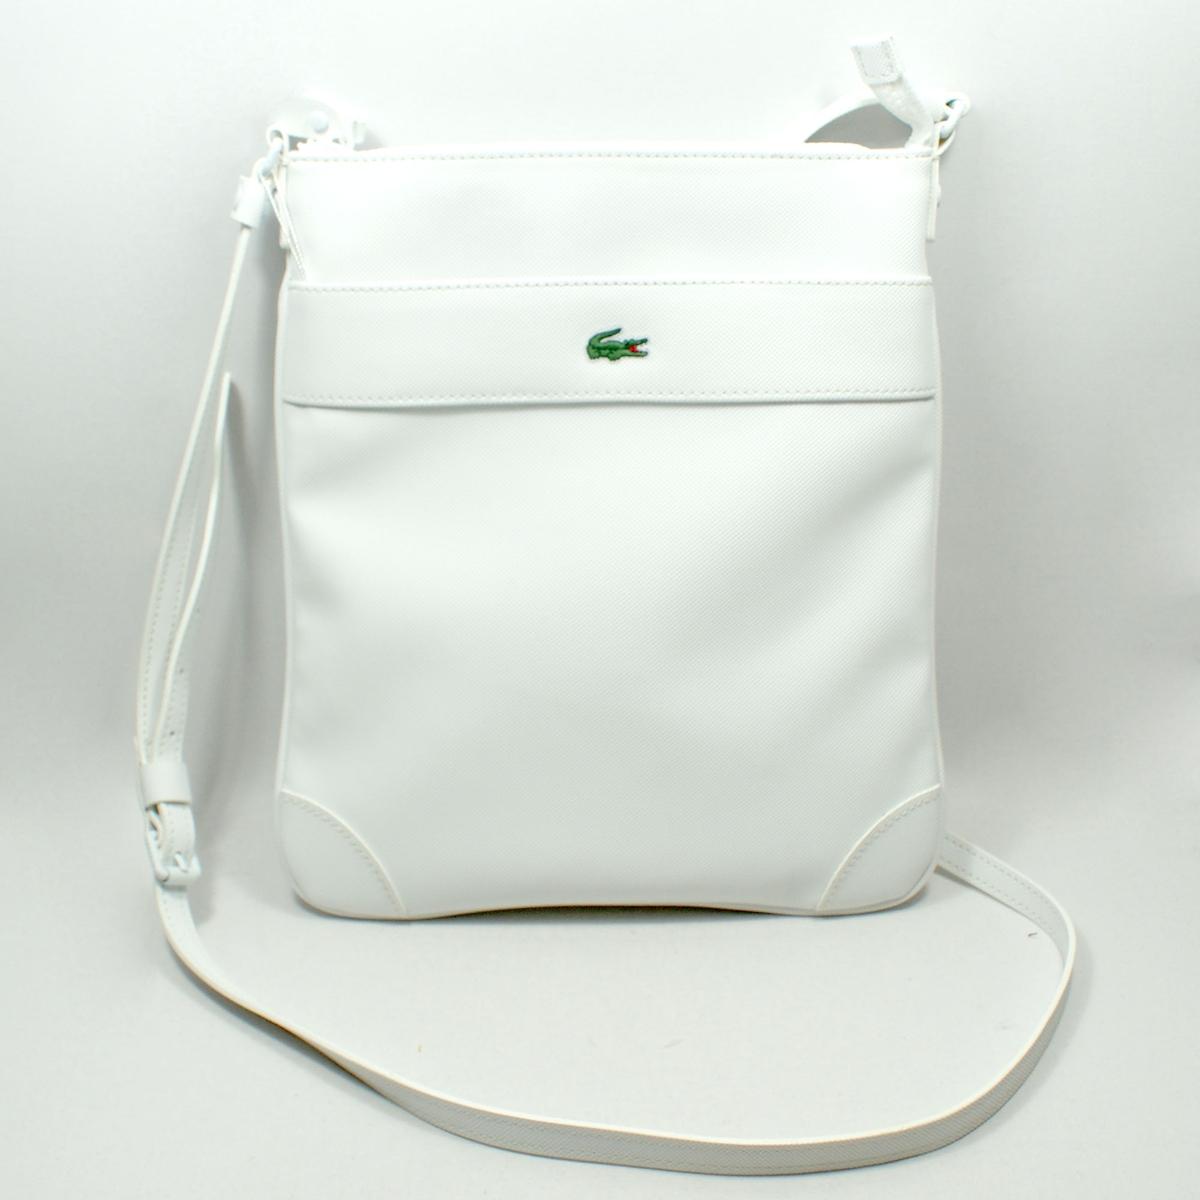 lacoste small flat crossover bag